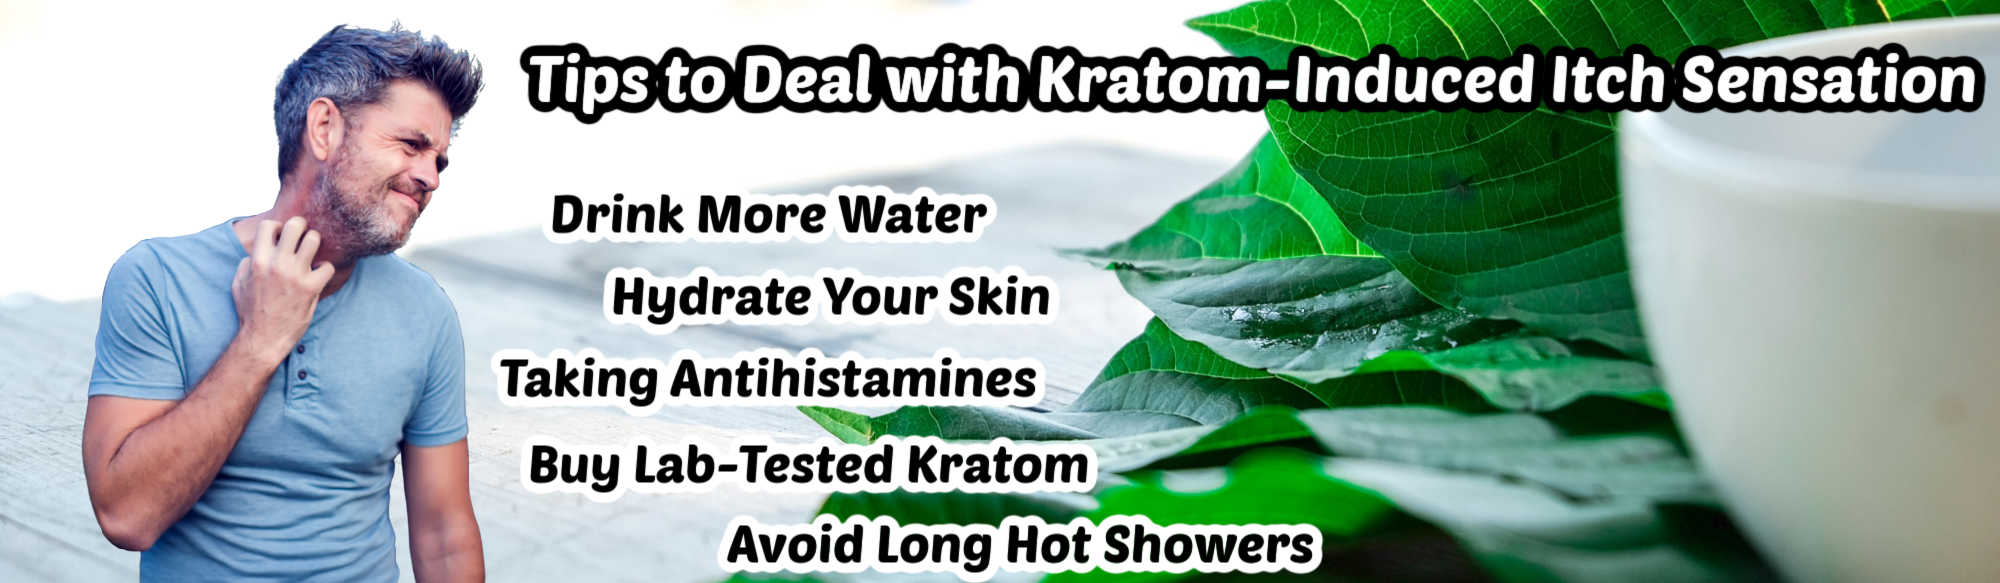 image of tips to deal with kratom induced itch sensation